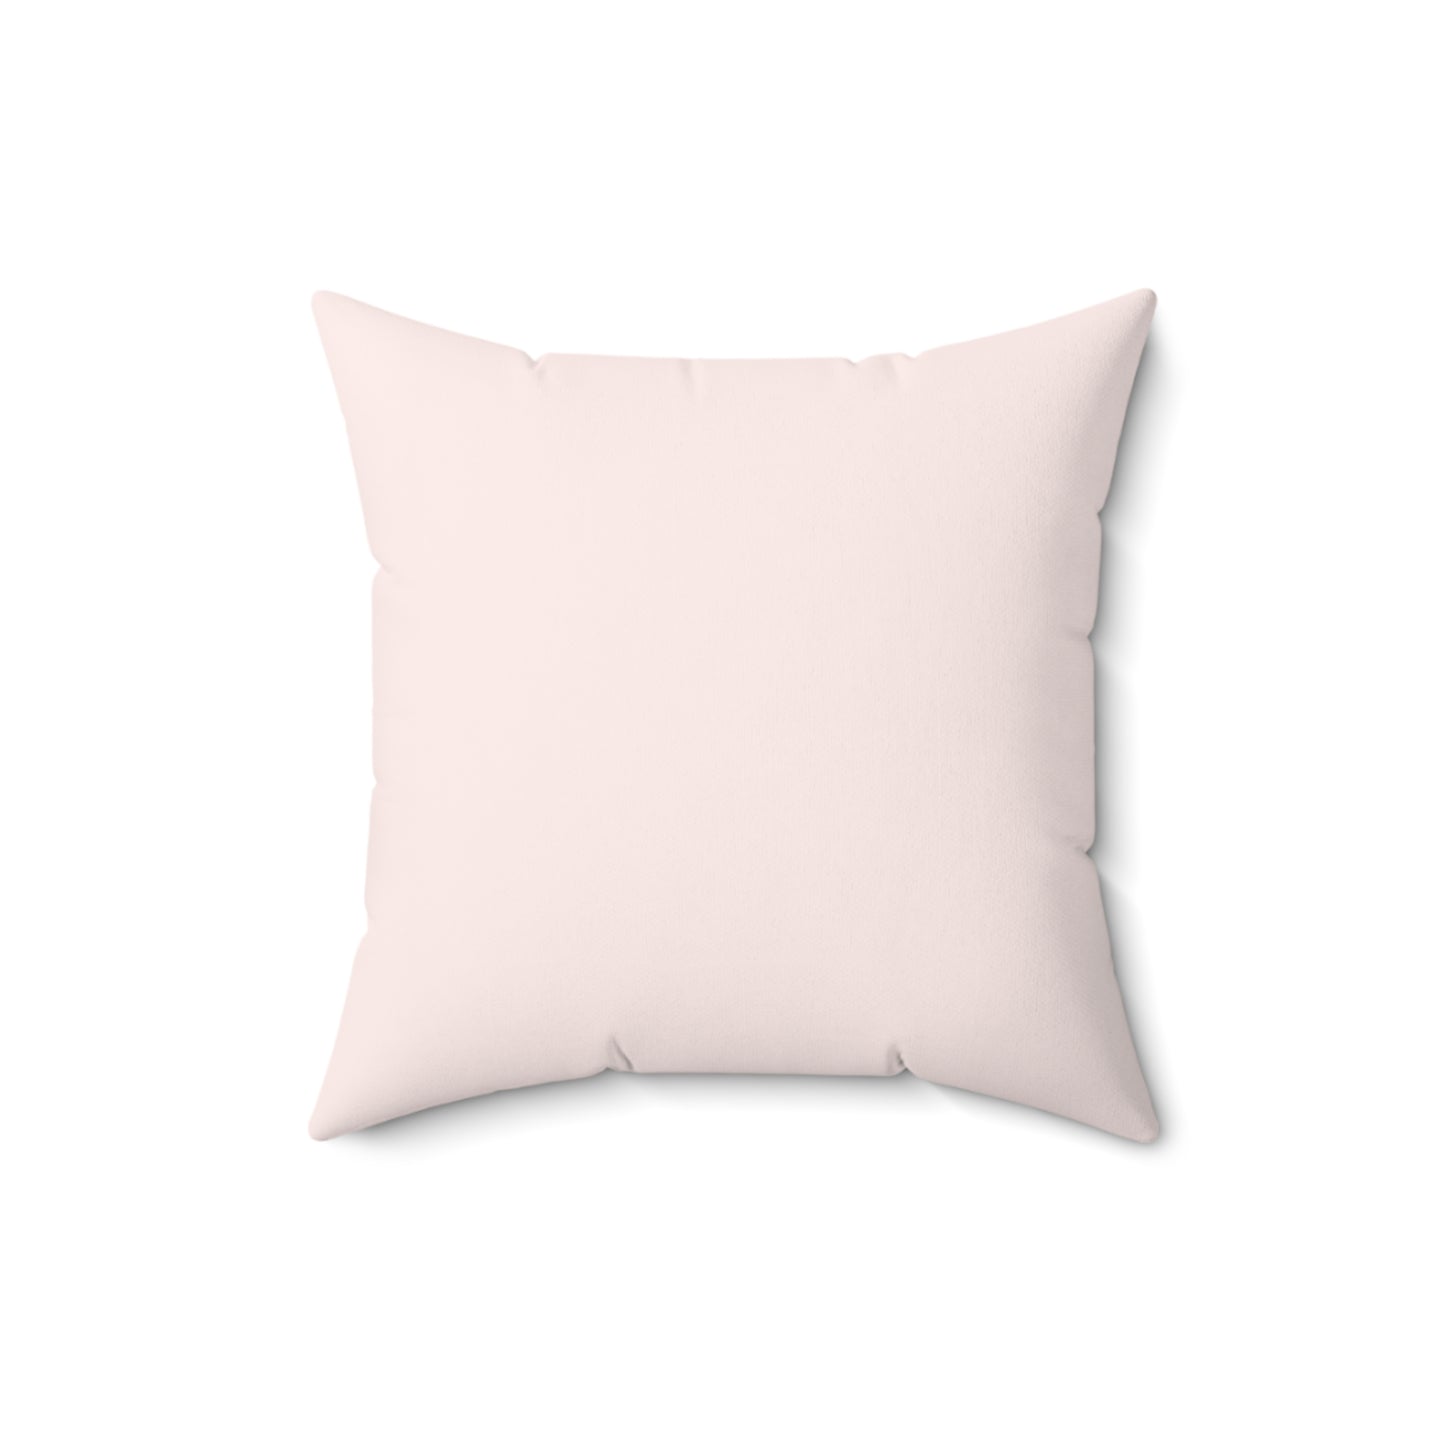 Let's Go Girls Pink Purple Cowgirl Square Pillow Multiple Sizes